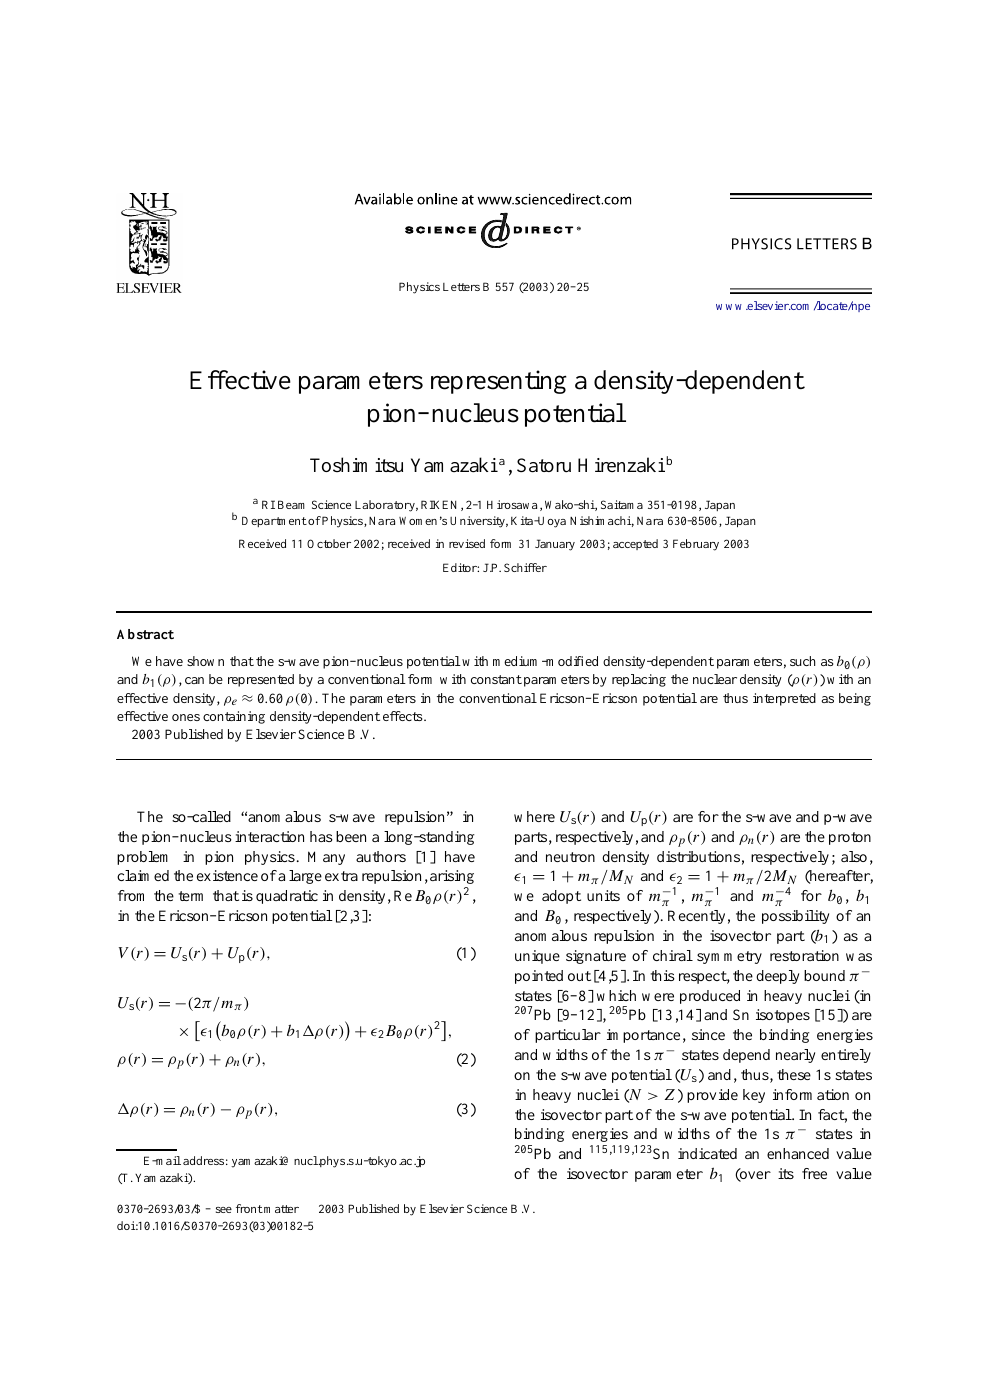 Effective Parameters Representing A Density Dependent Pion Nucleus Potential Topic Of Research Paper In Physical Sciences Download Scholarly Article Pdf And Read For Free On Cyberleninka Open Science Hub